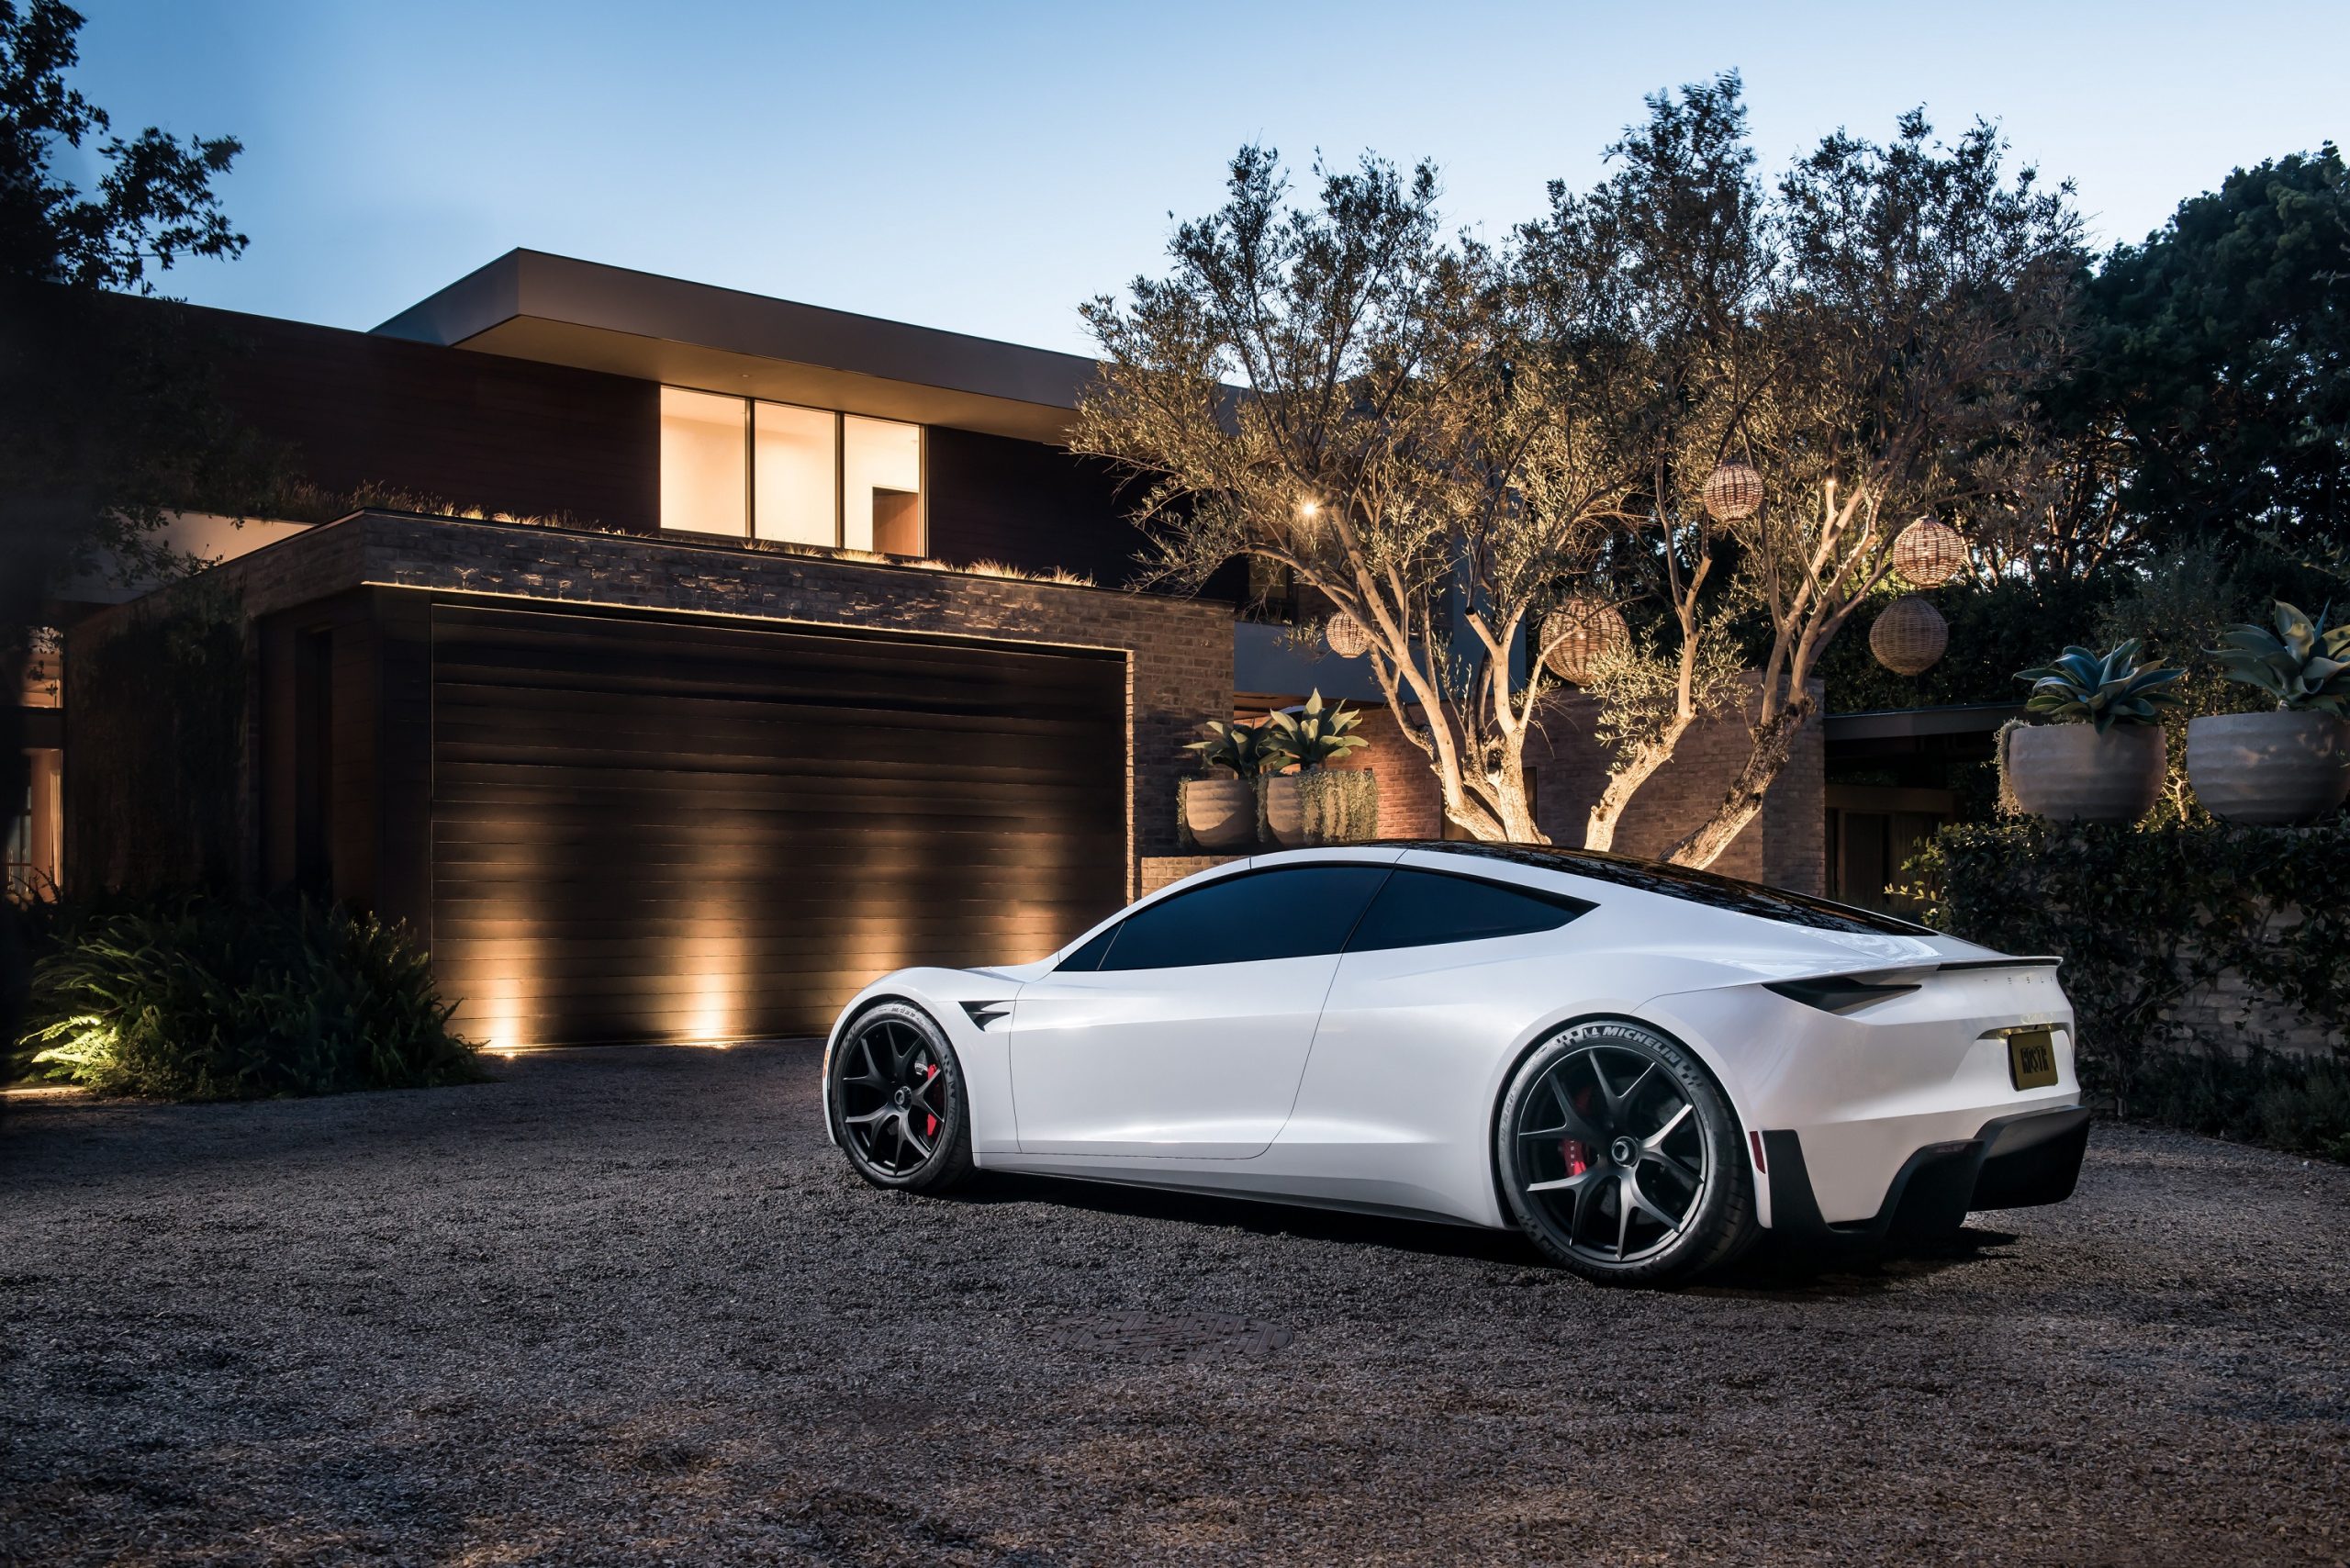 A white Tesla Roadster shot from the rear 3/4 angle in front of a house